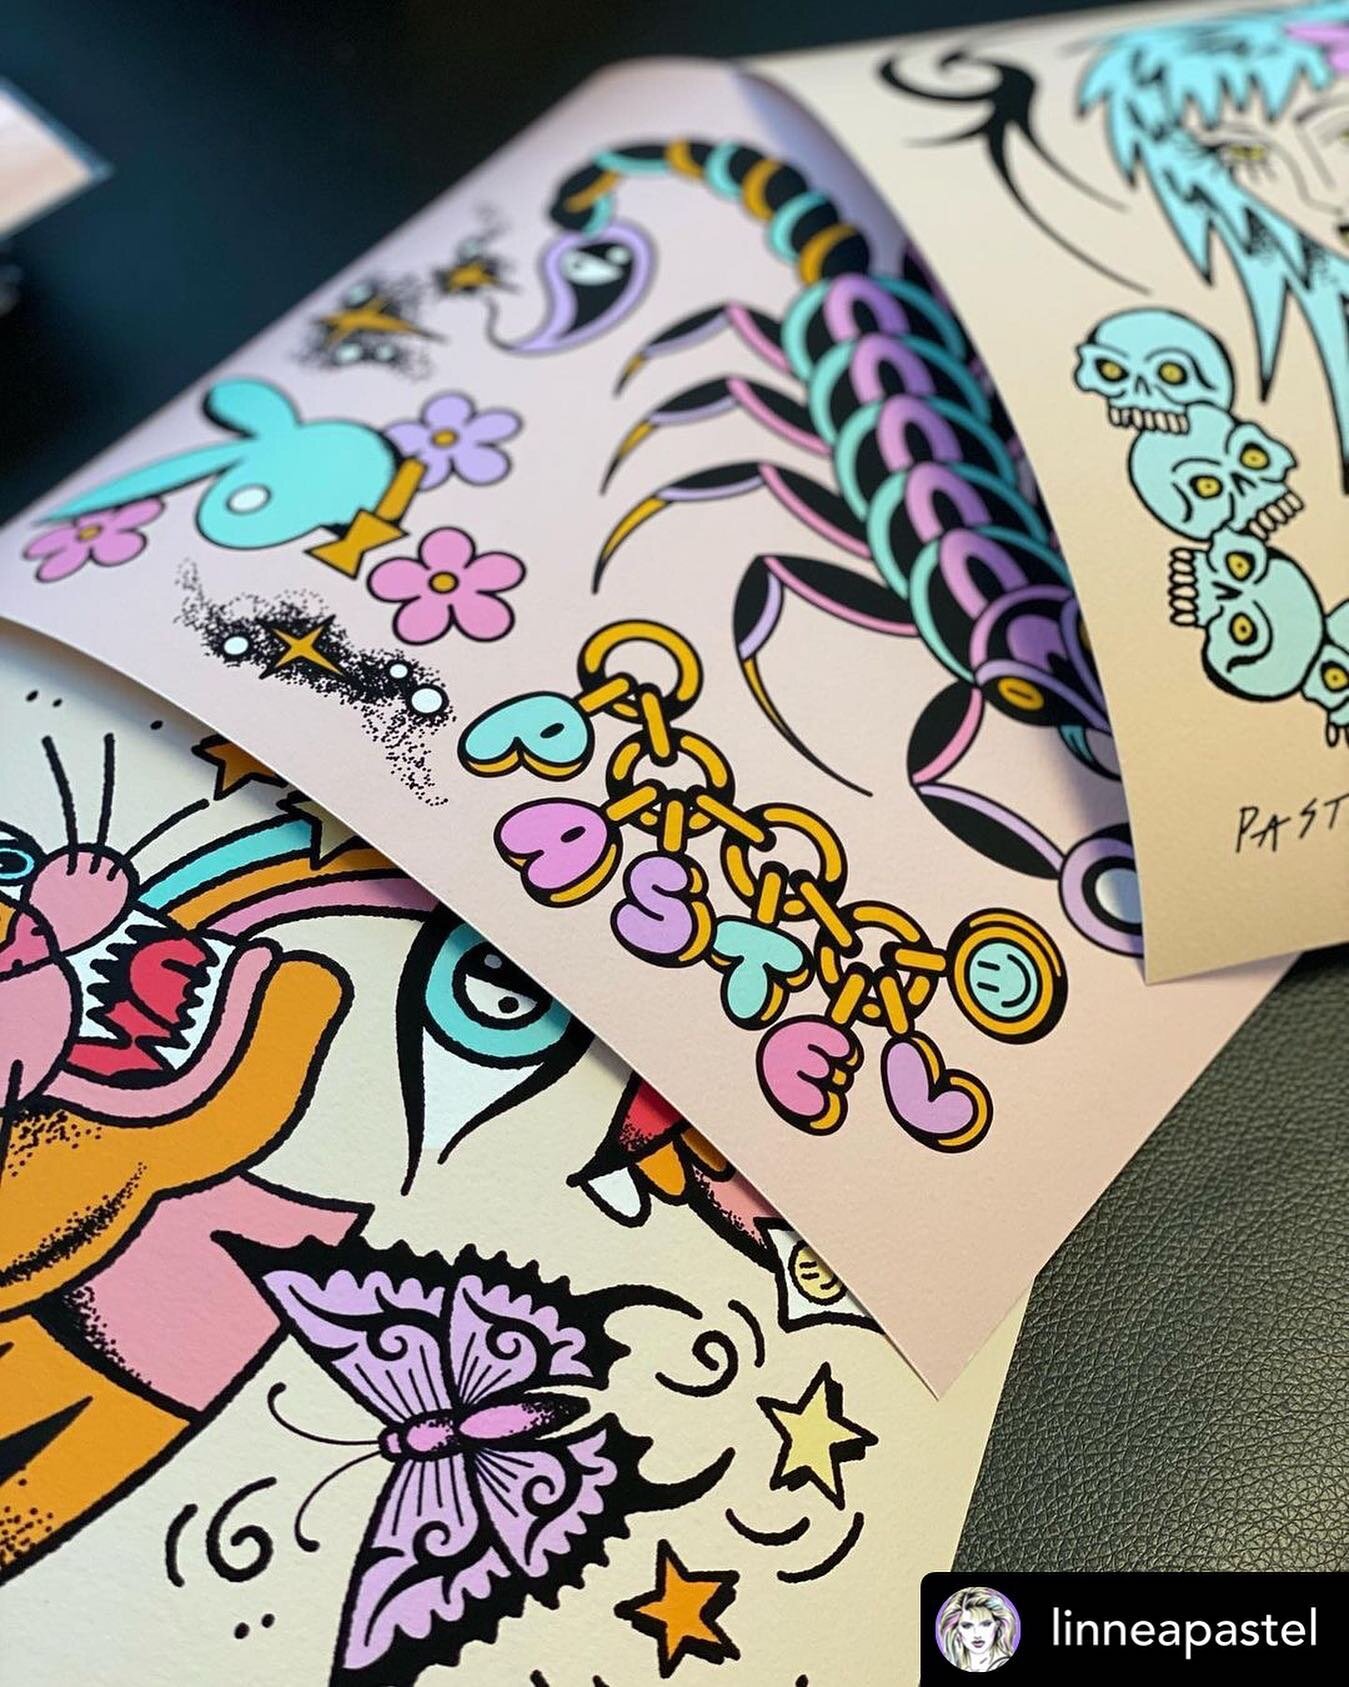 We never get tired of seeing these come out of the printer! Always a pleasure, @linneapastel! #AFAPCommunity

#repost

@linneapastel PRINTS ARE UP ON MY SITE! 
link in bio to shop ✨✨✨
these babies are vibrant and velvety 🤤 

printed by: @ashevillefi